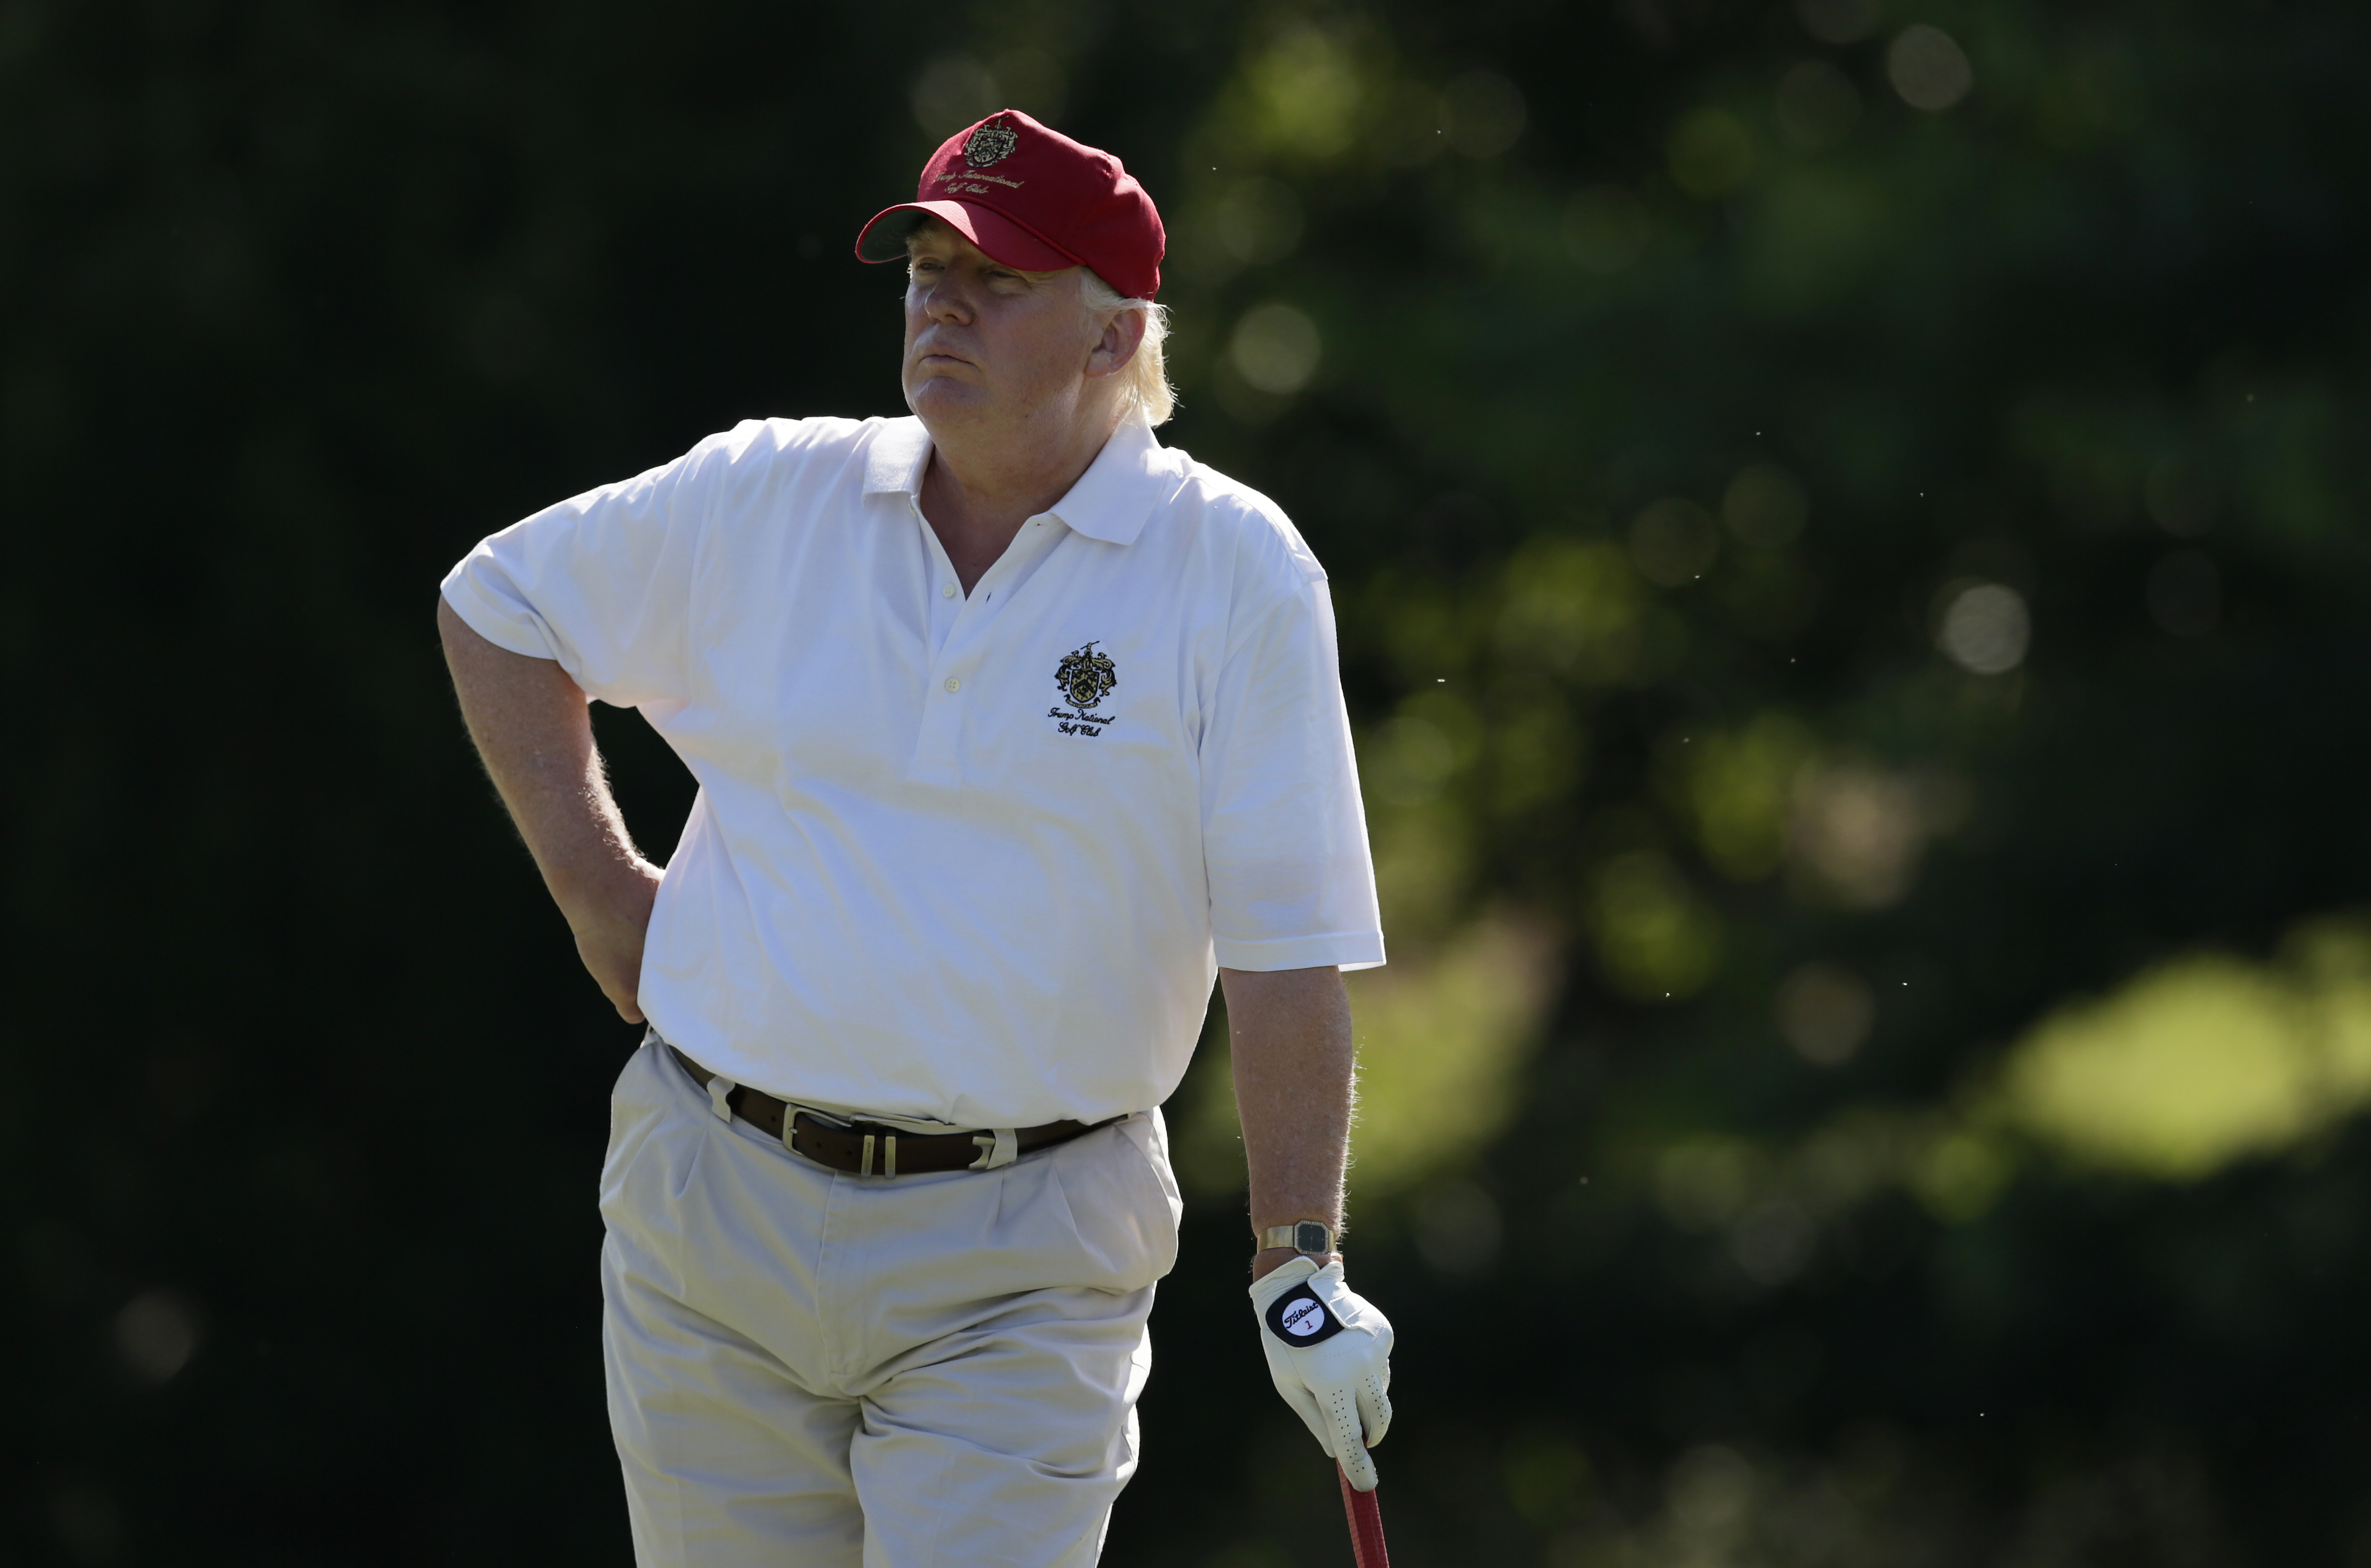 Donald Trump during a pro-am round of the AT&amp;T National golf tournament in Bethesda, Md. on June 27, 2012.